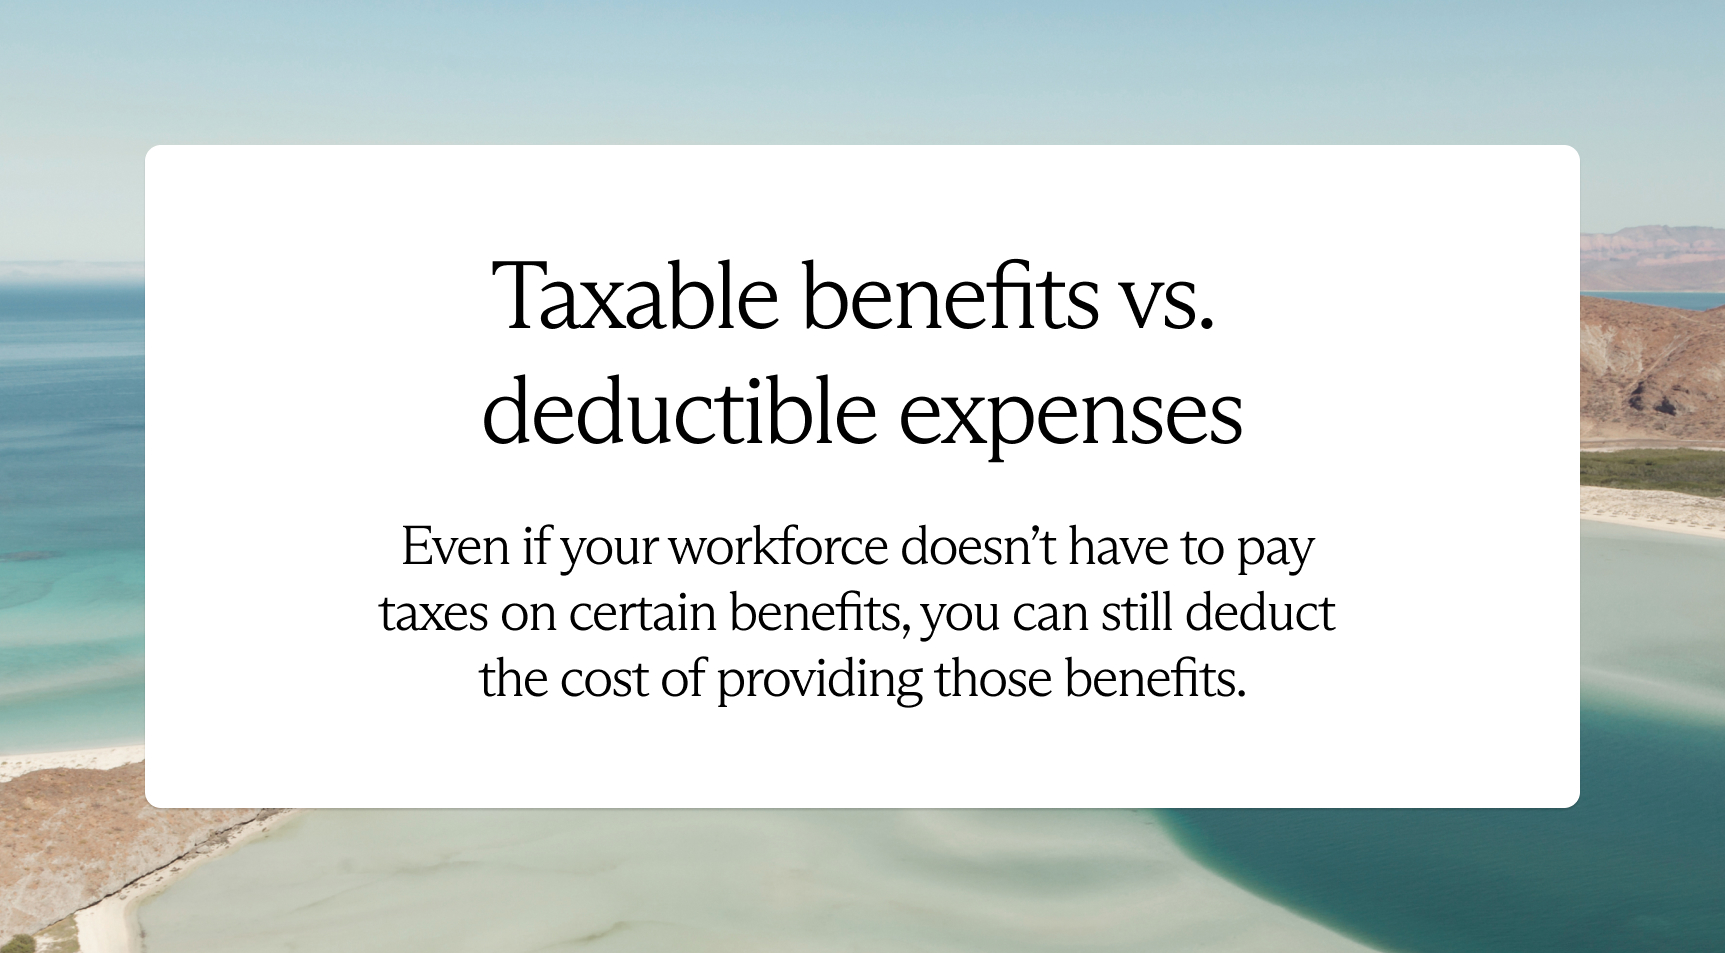 Even if your workforce doesn't have to pay taxes on certain benefits, you can still deduct the cost of providing those benefits.